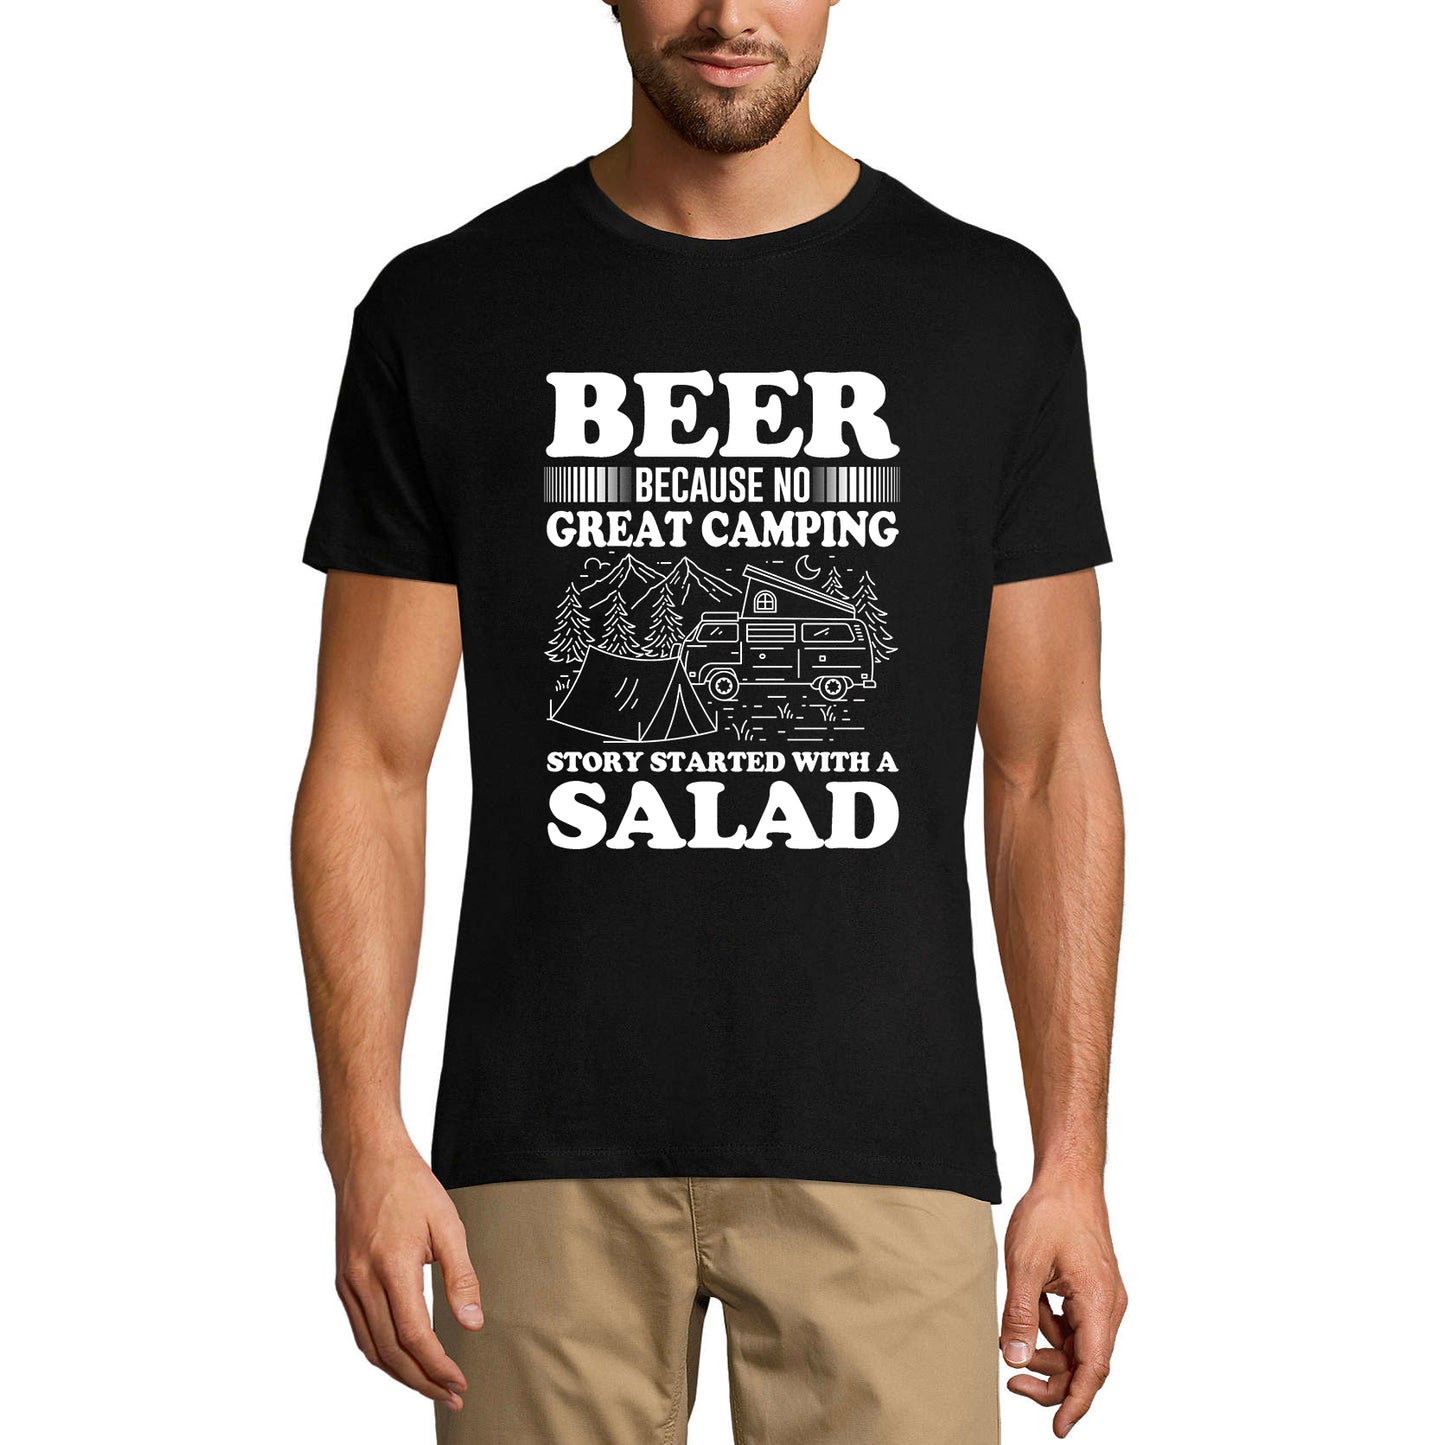 ULTRABASIC Herren-T-Shirt „Beer Because No Great Camping Story Started With a Salad“ – Bierliebhaber-T-Shirt